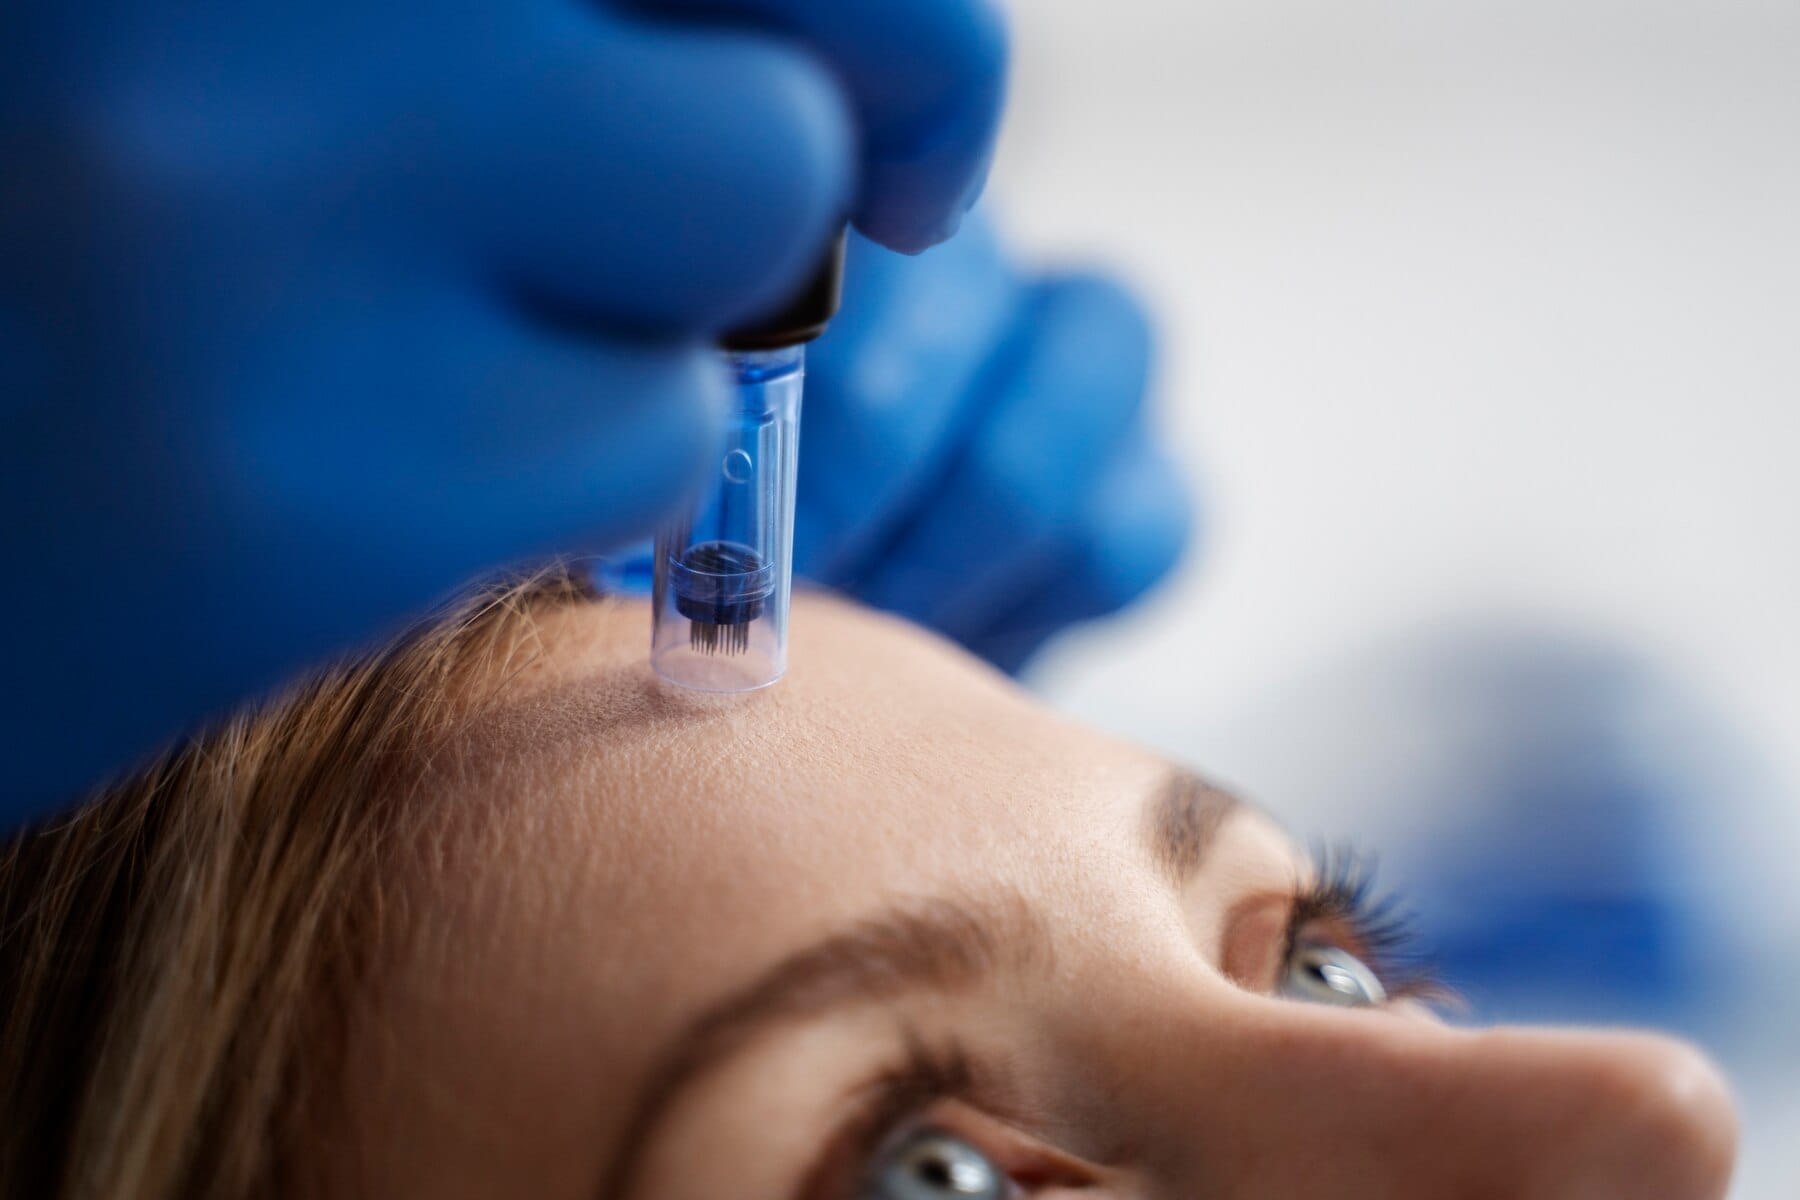 A woman is undergoing a skin treatment procedure, getting her eyebrows injected with a needle.